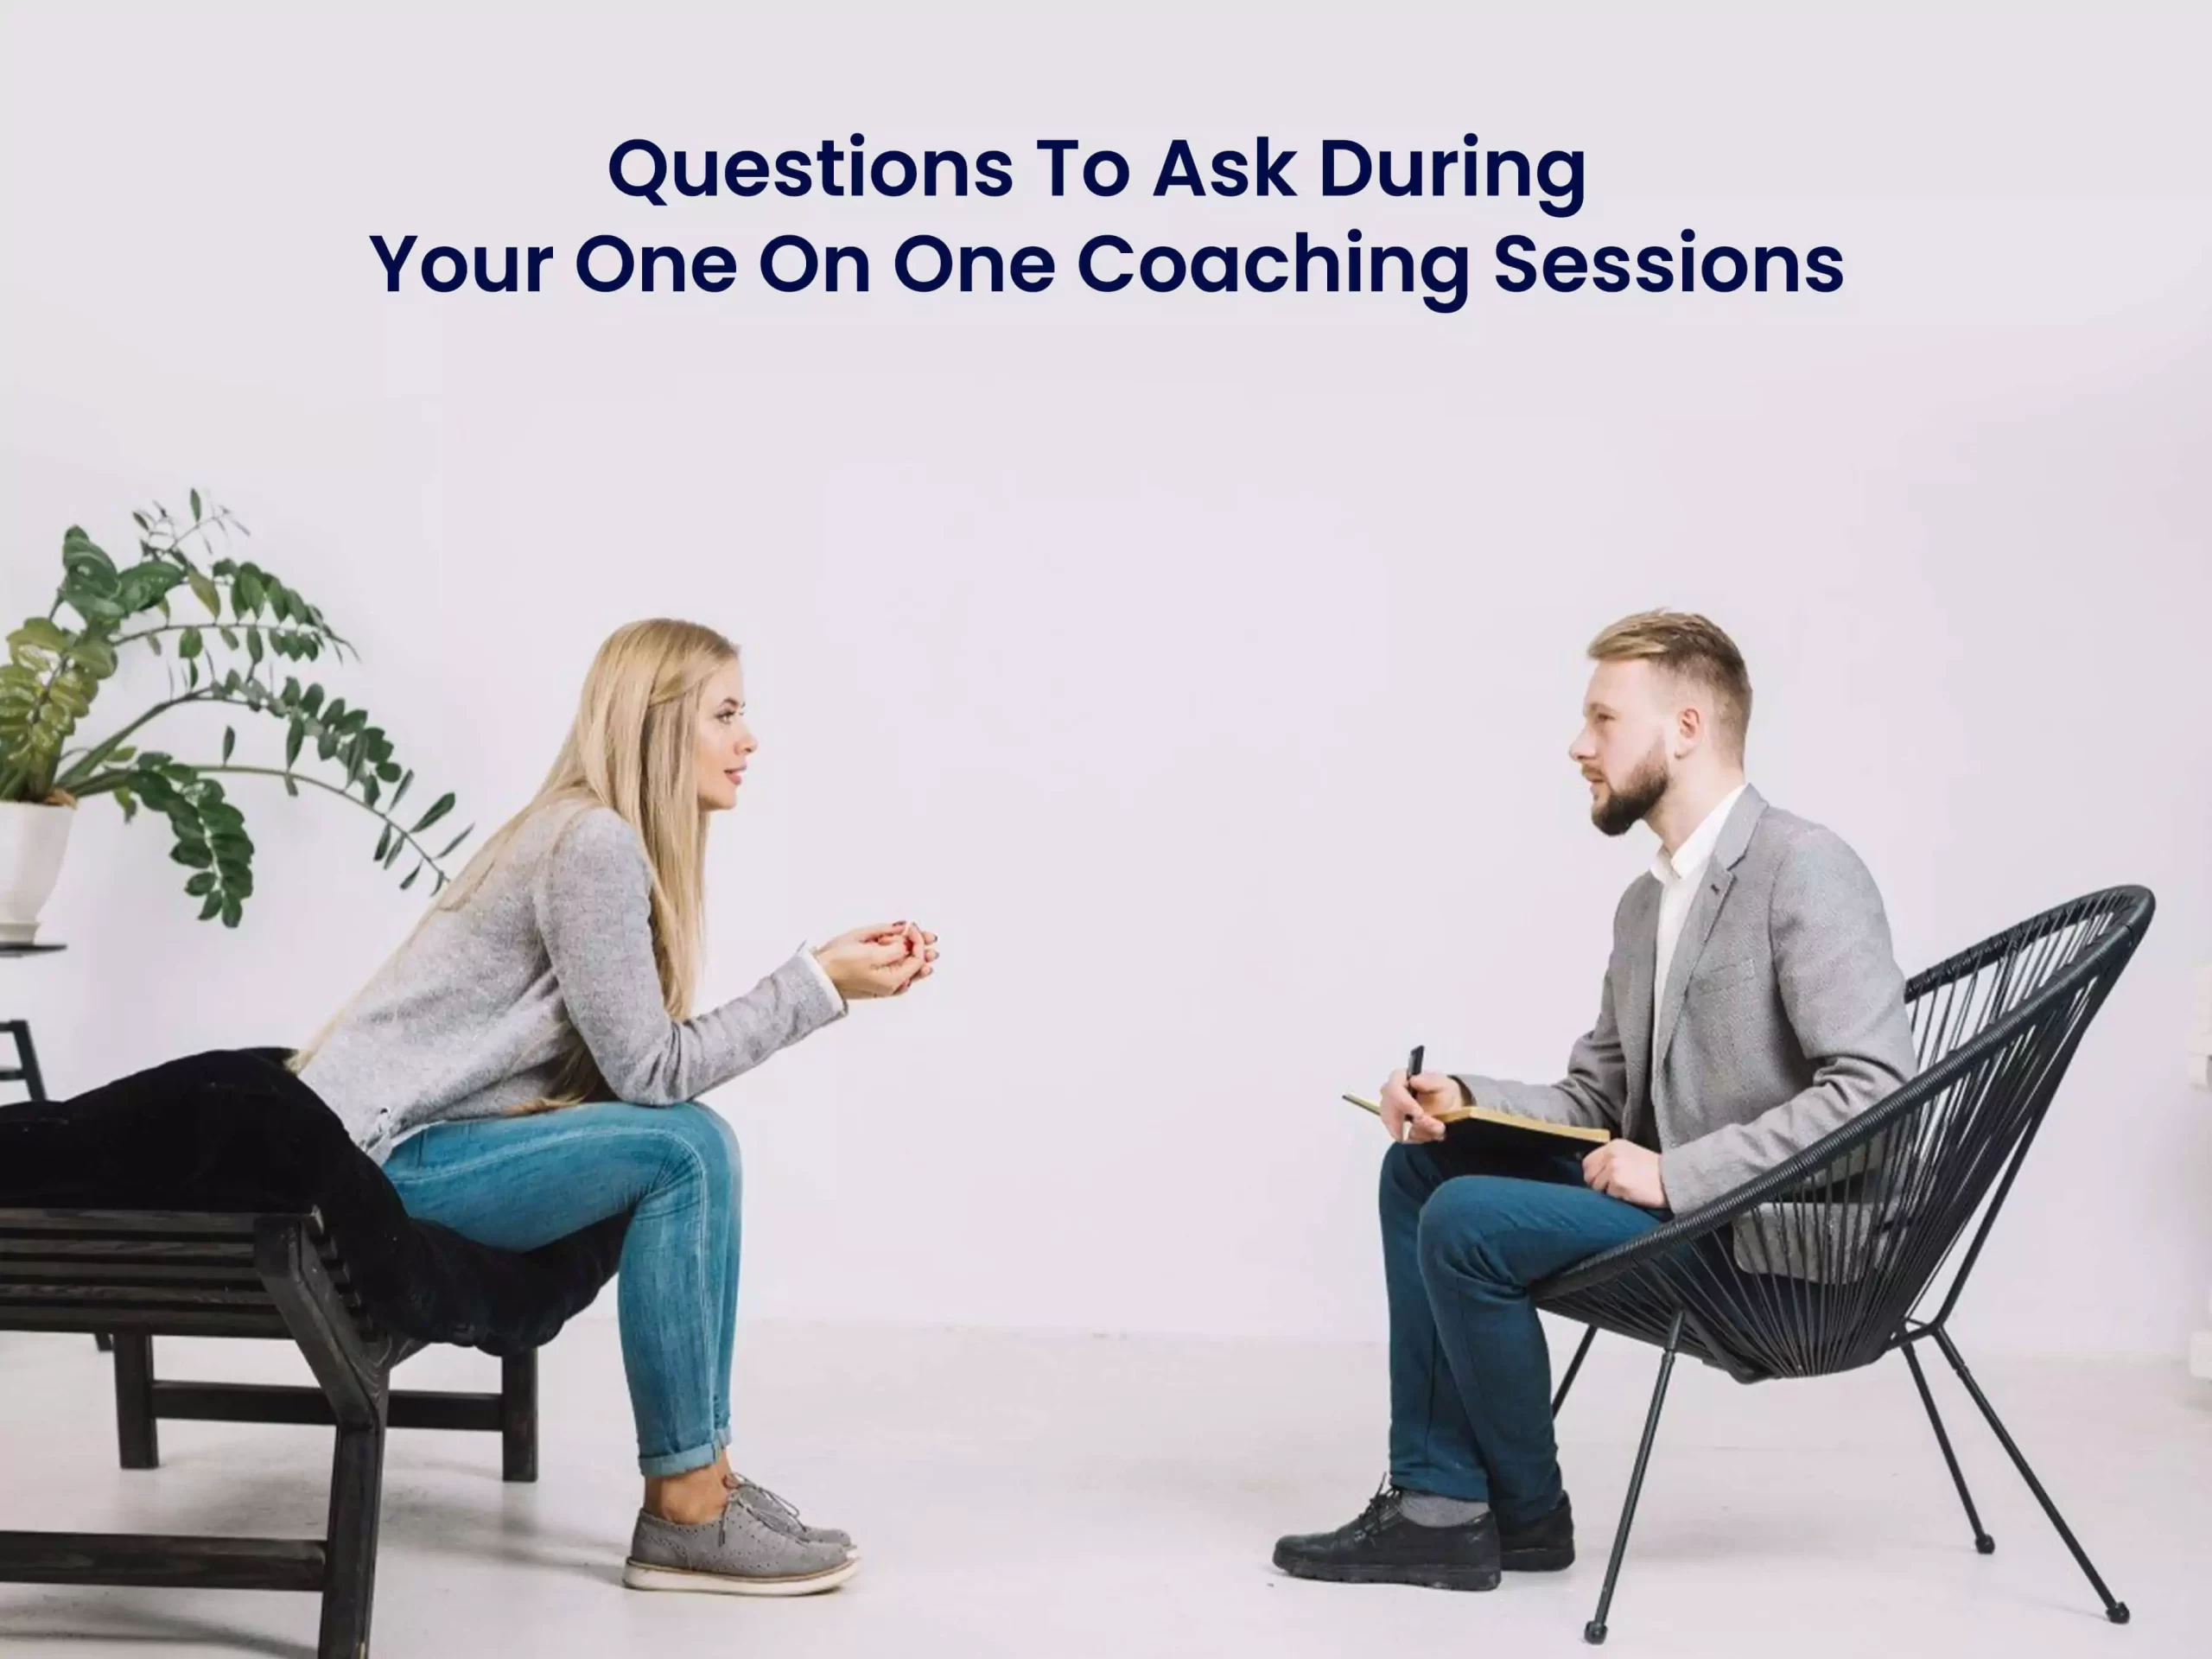 Questions To Ask During Your One On One Coaching Sessions